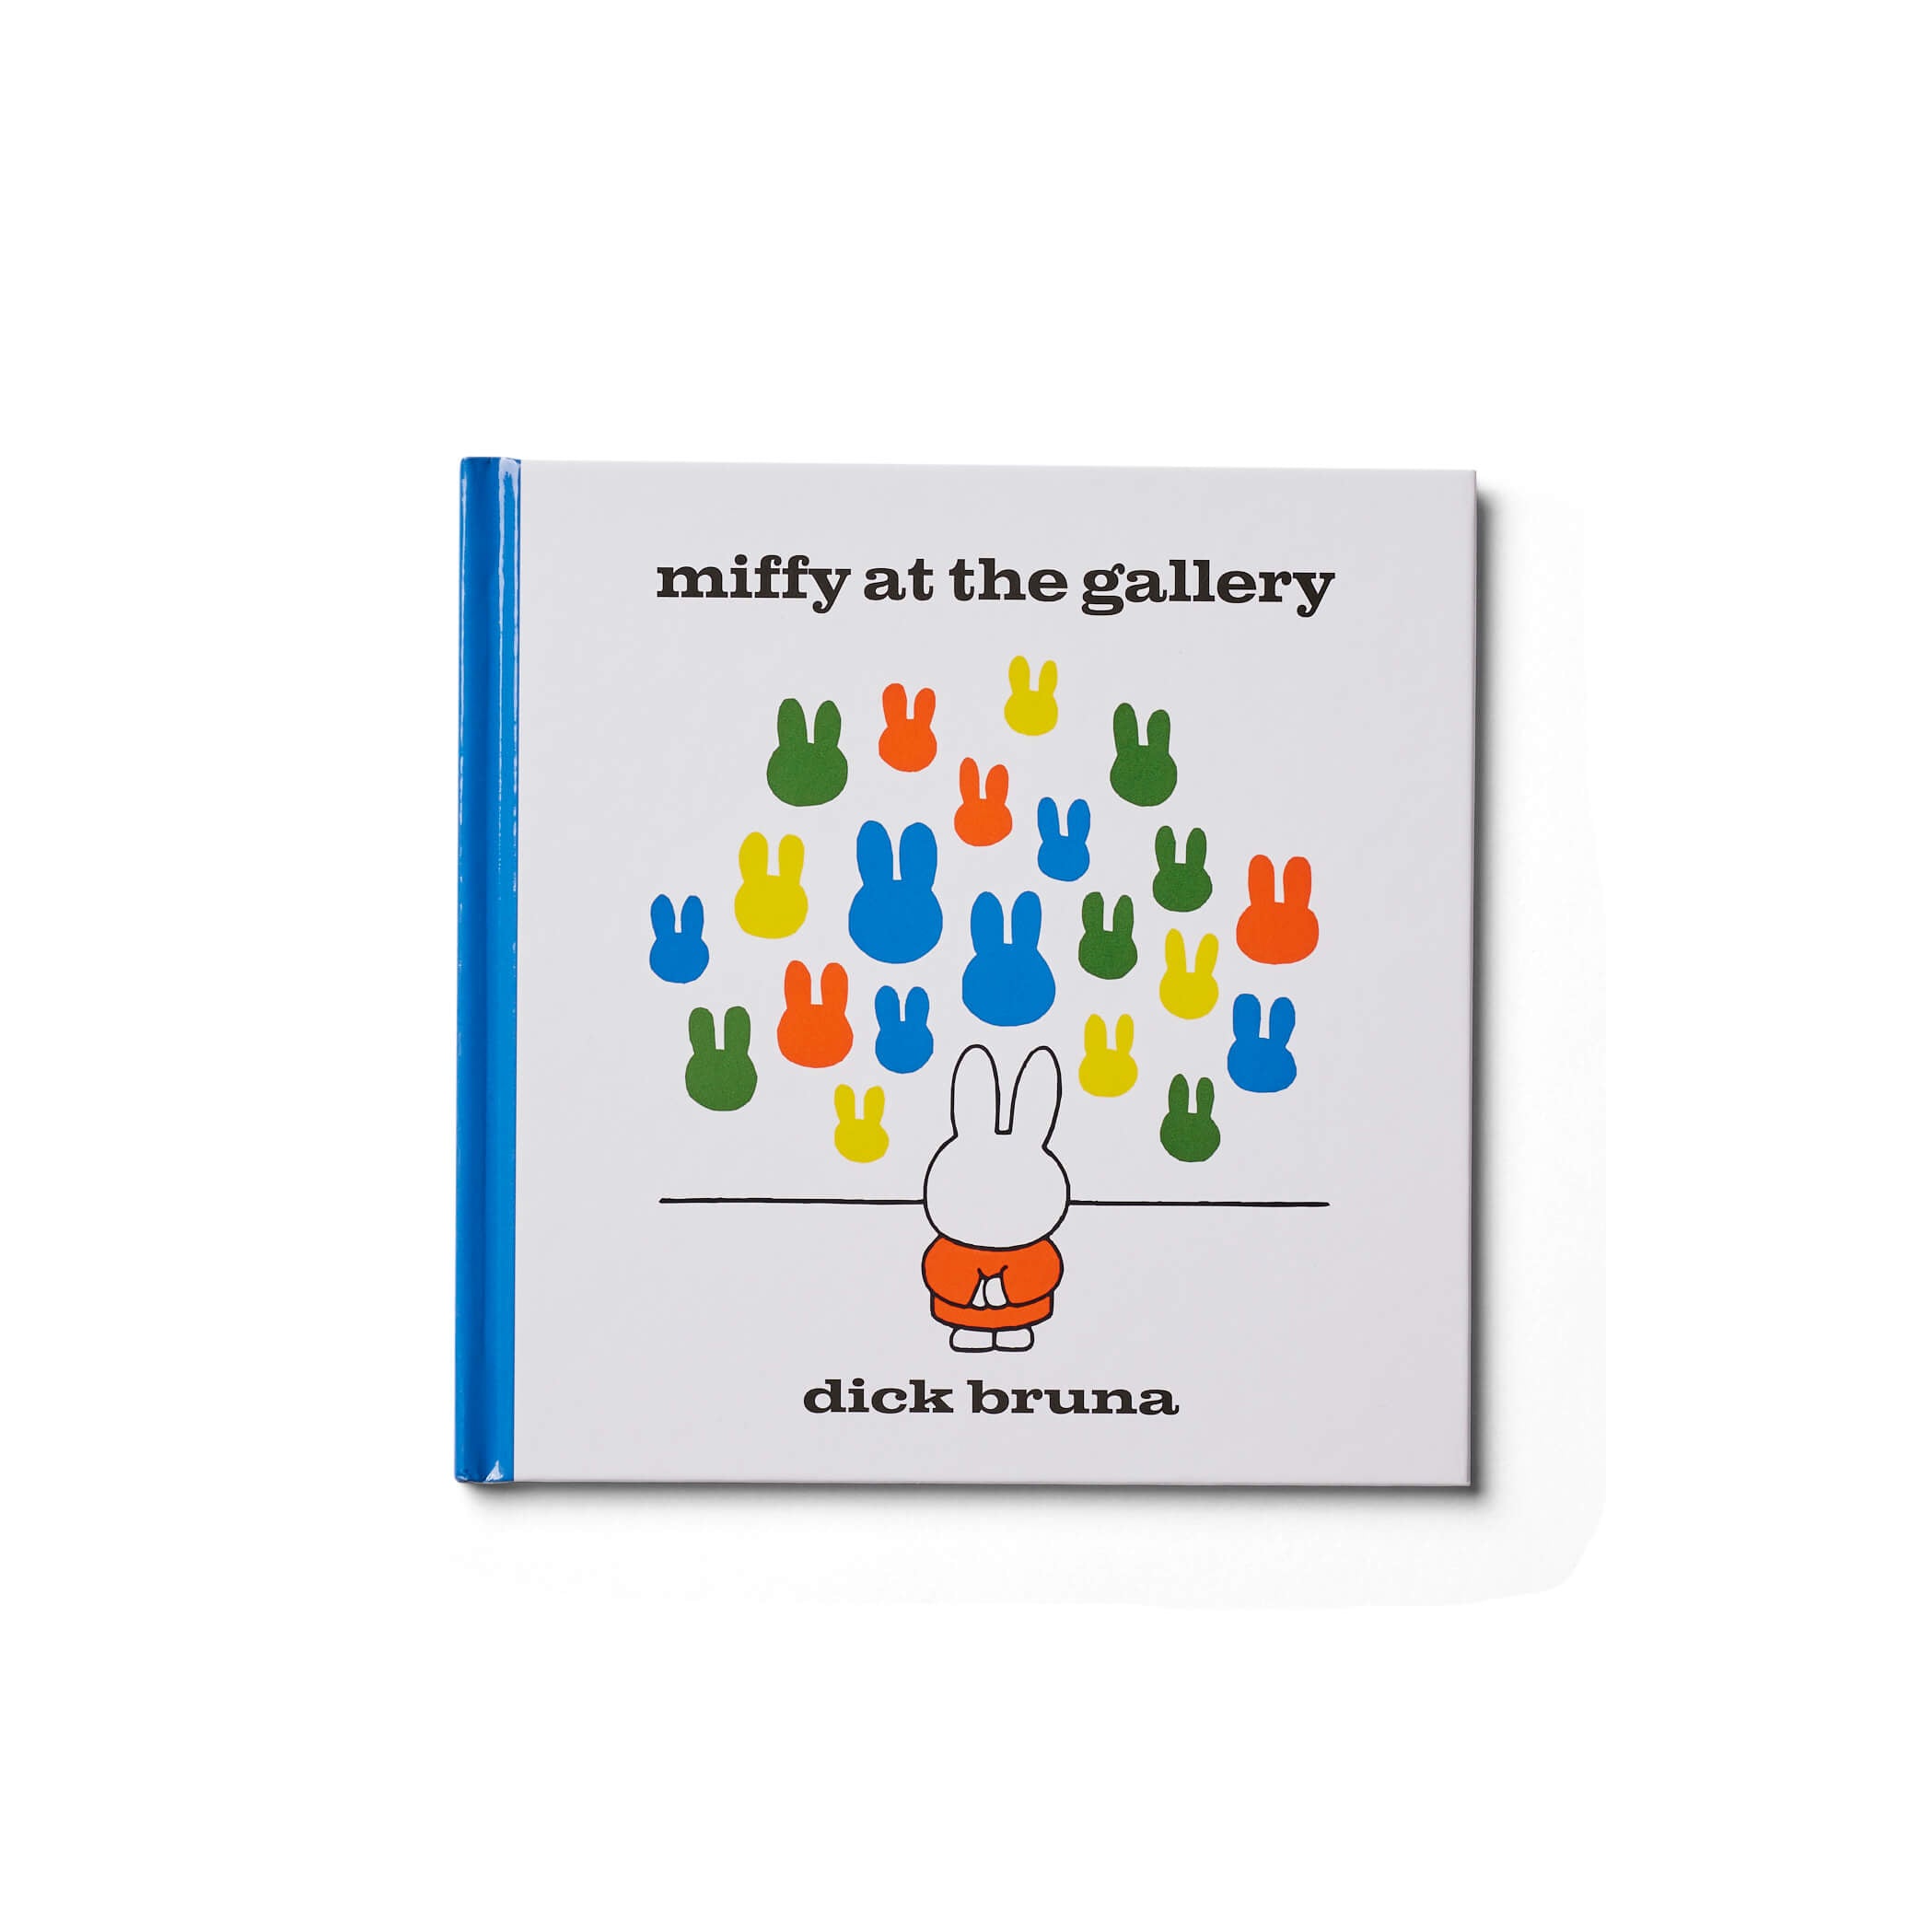 Miffy at the Gallery